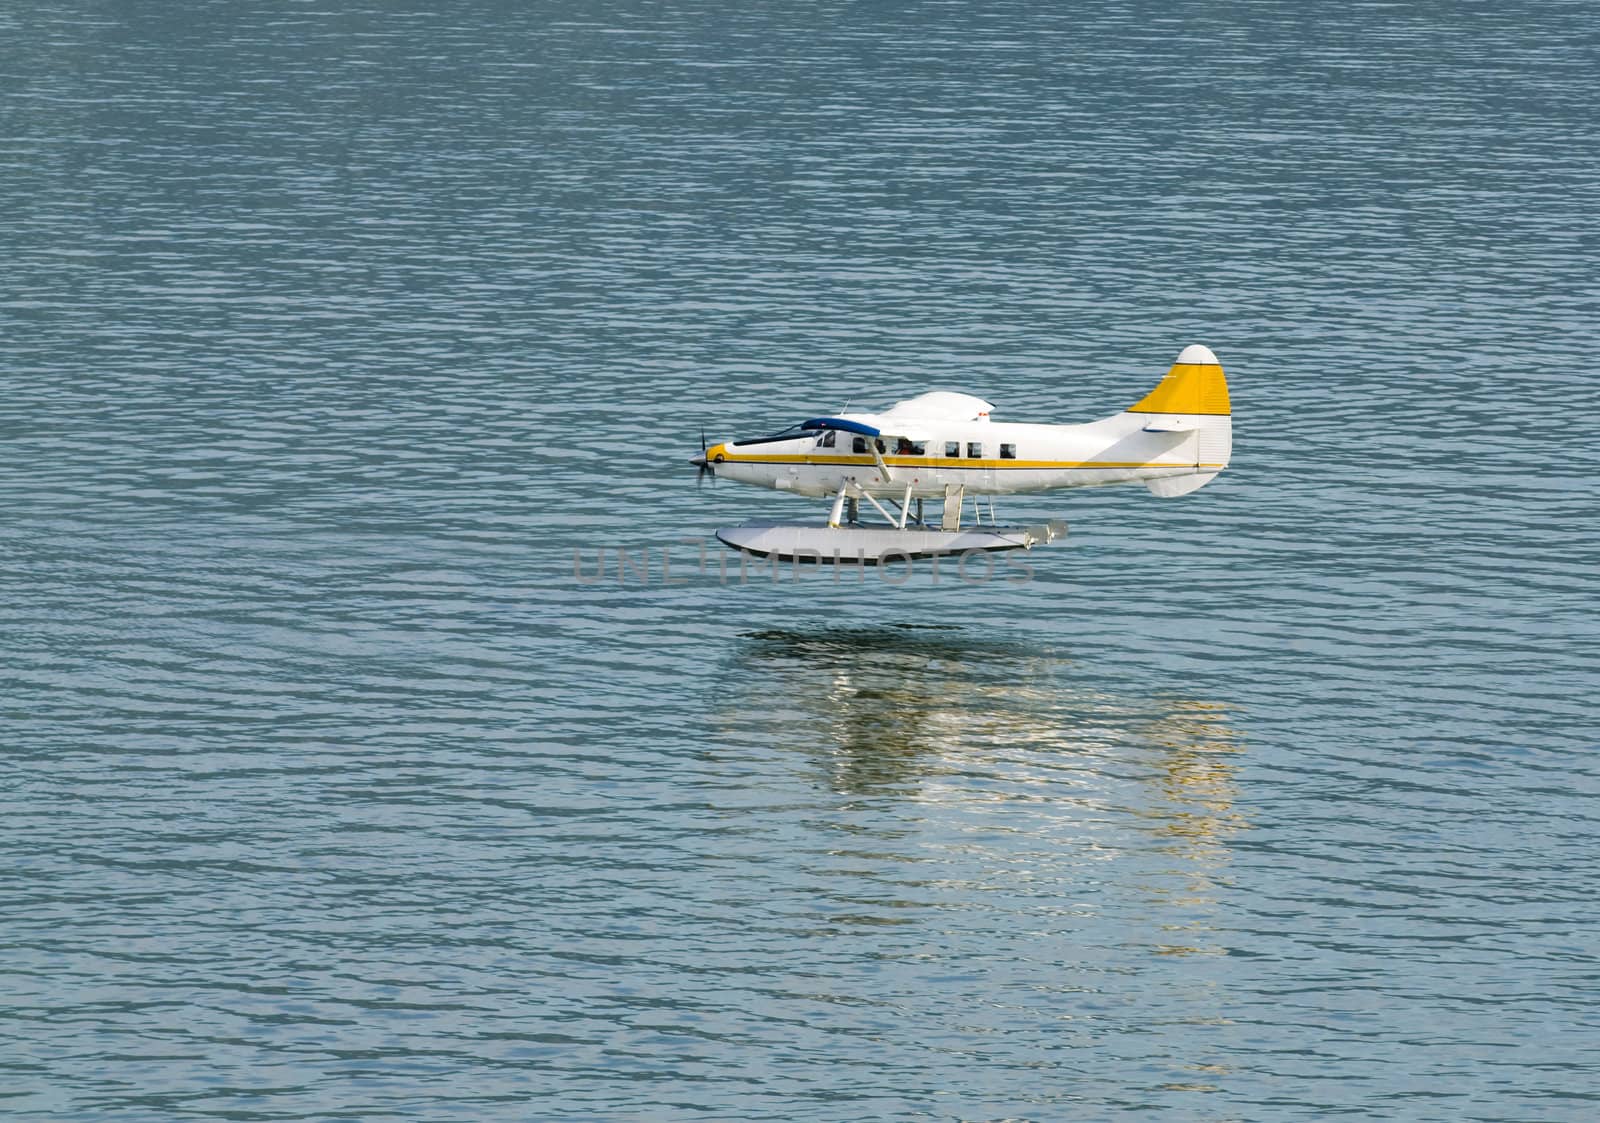 single engined seaplane coming into land with a reflection just prior to touch down